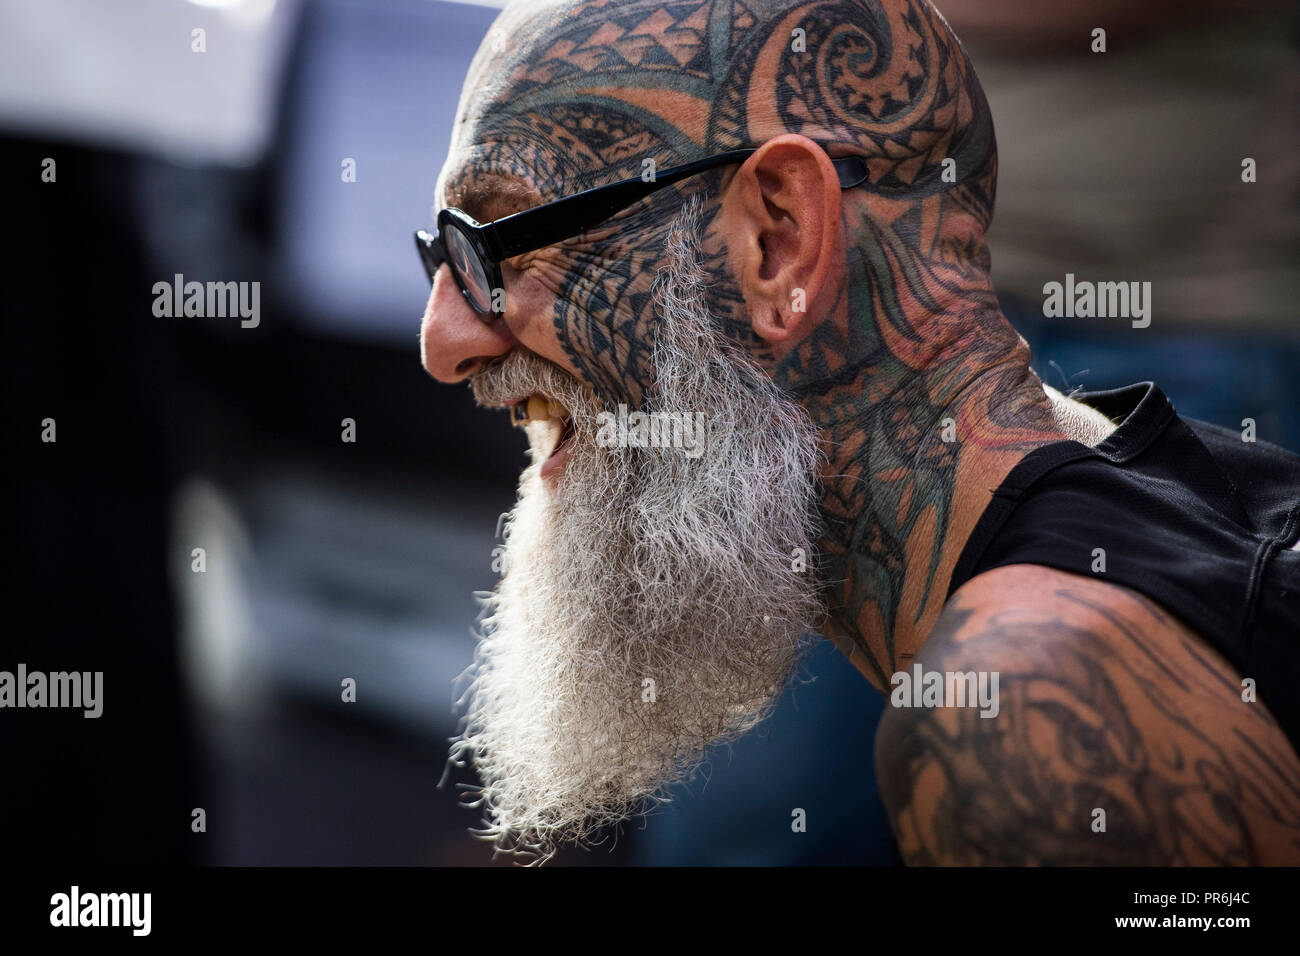 A man show off his tattoos during the International tattoo convention at Tobacco Dock in east London. Stock Photo